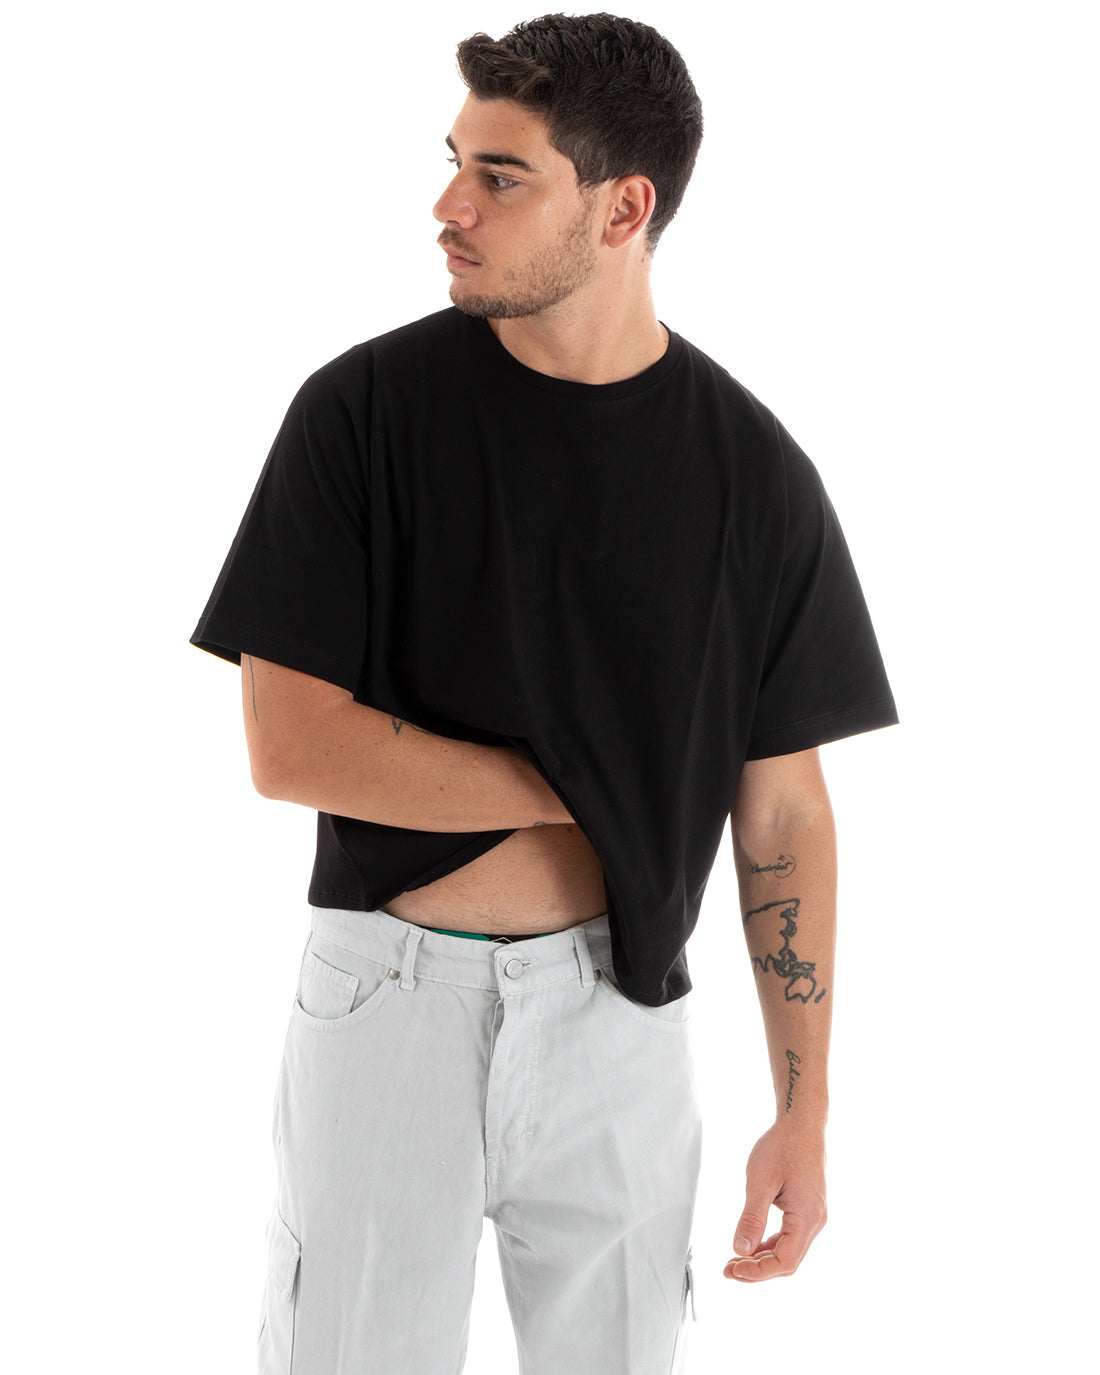 Men's T-shirt Cropped Oversize Boxy Fit Solid Color Short Black Casual GIOSAL-TS2879A